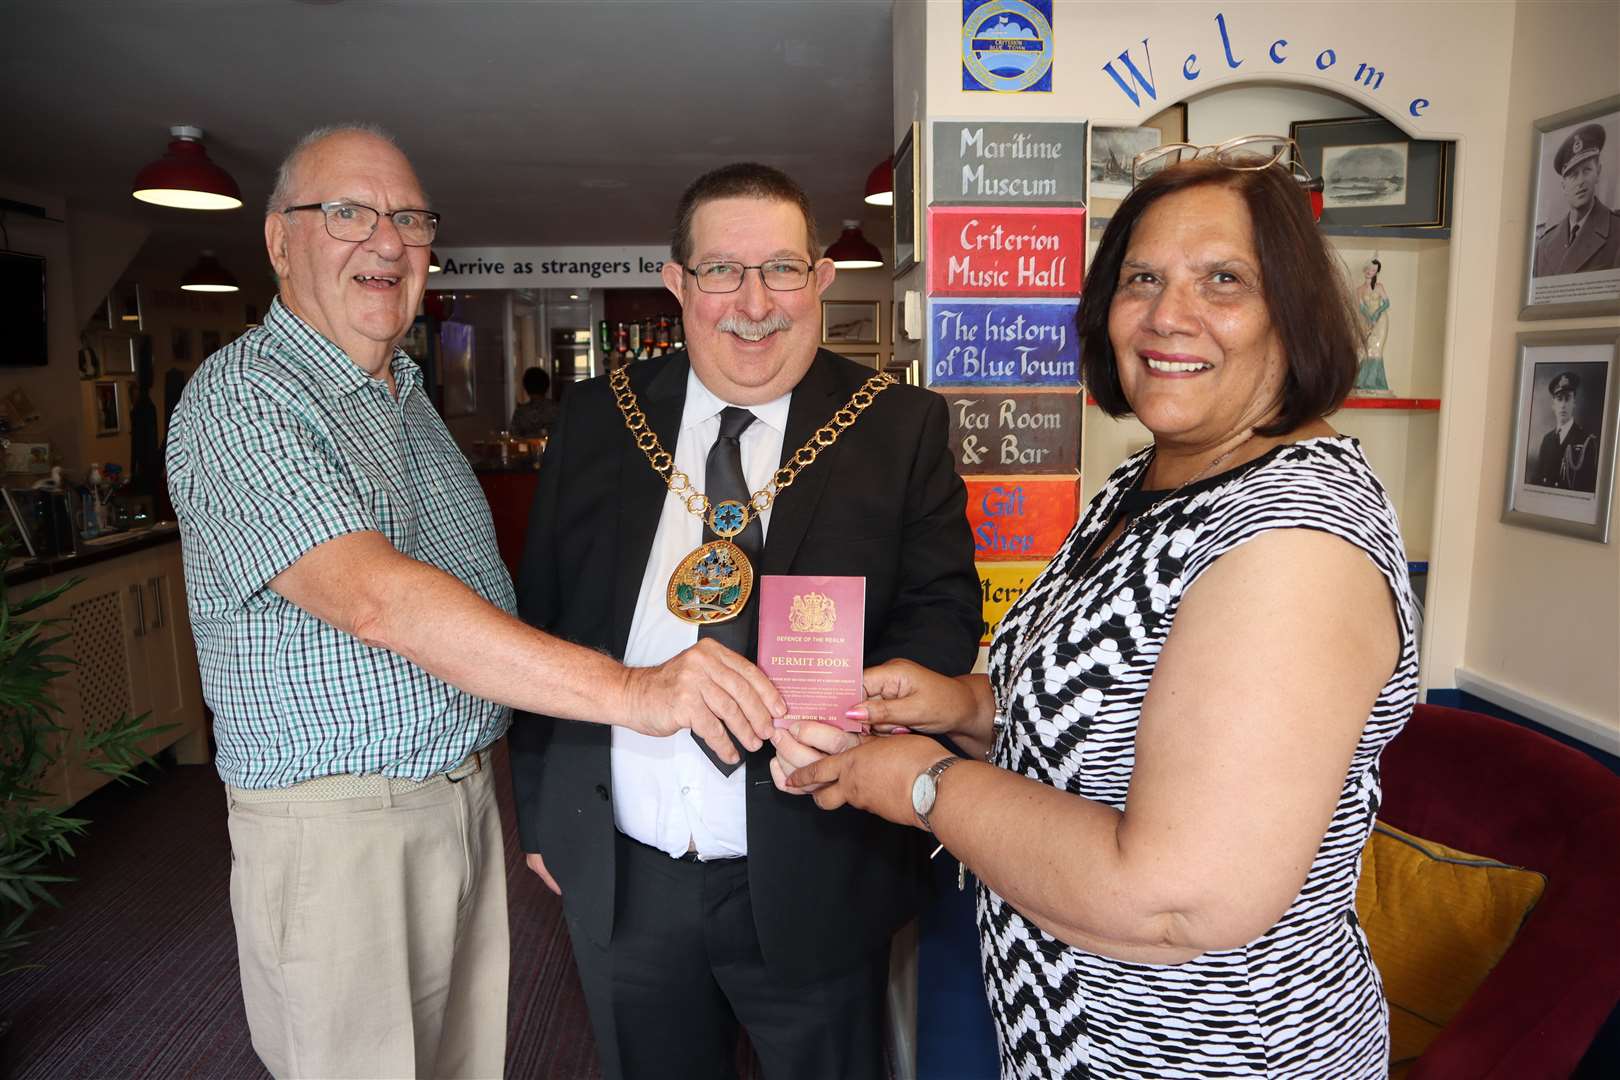 Swale mayor Simon Cook is presented with his own spoof Sheppey passport by Mike Brown and Jenny Hurkett of the Criterion Theatre